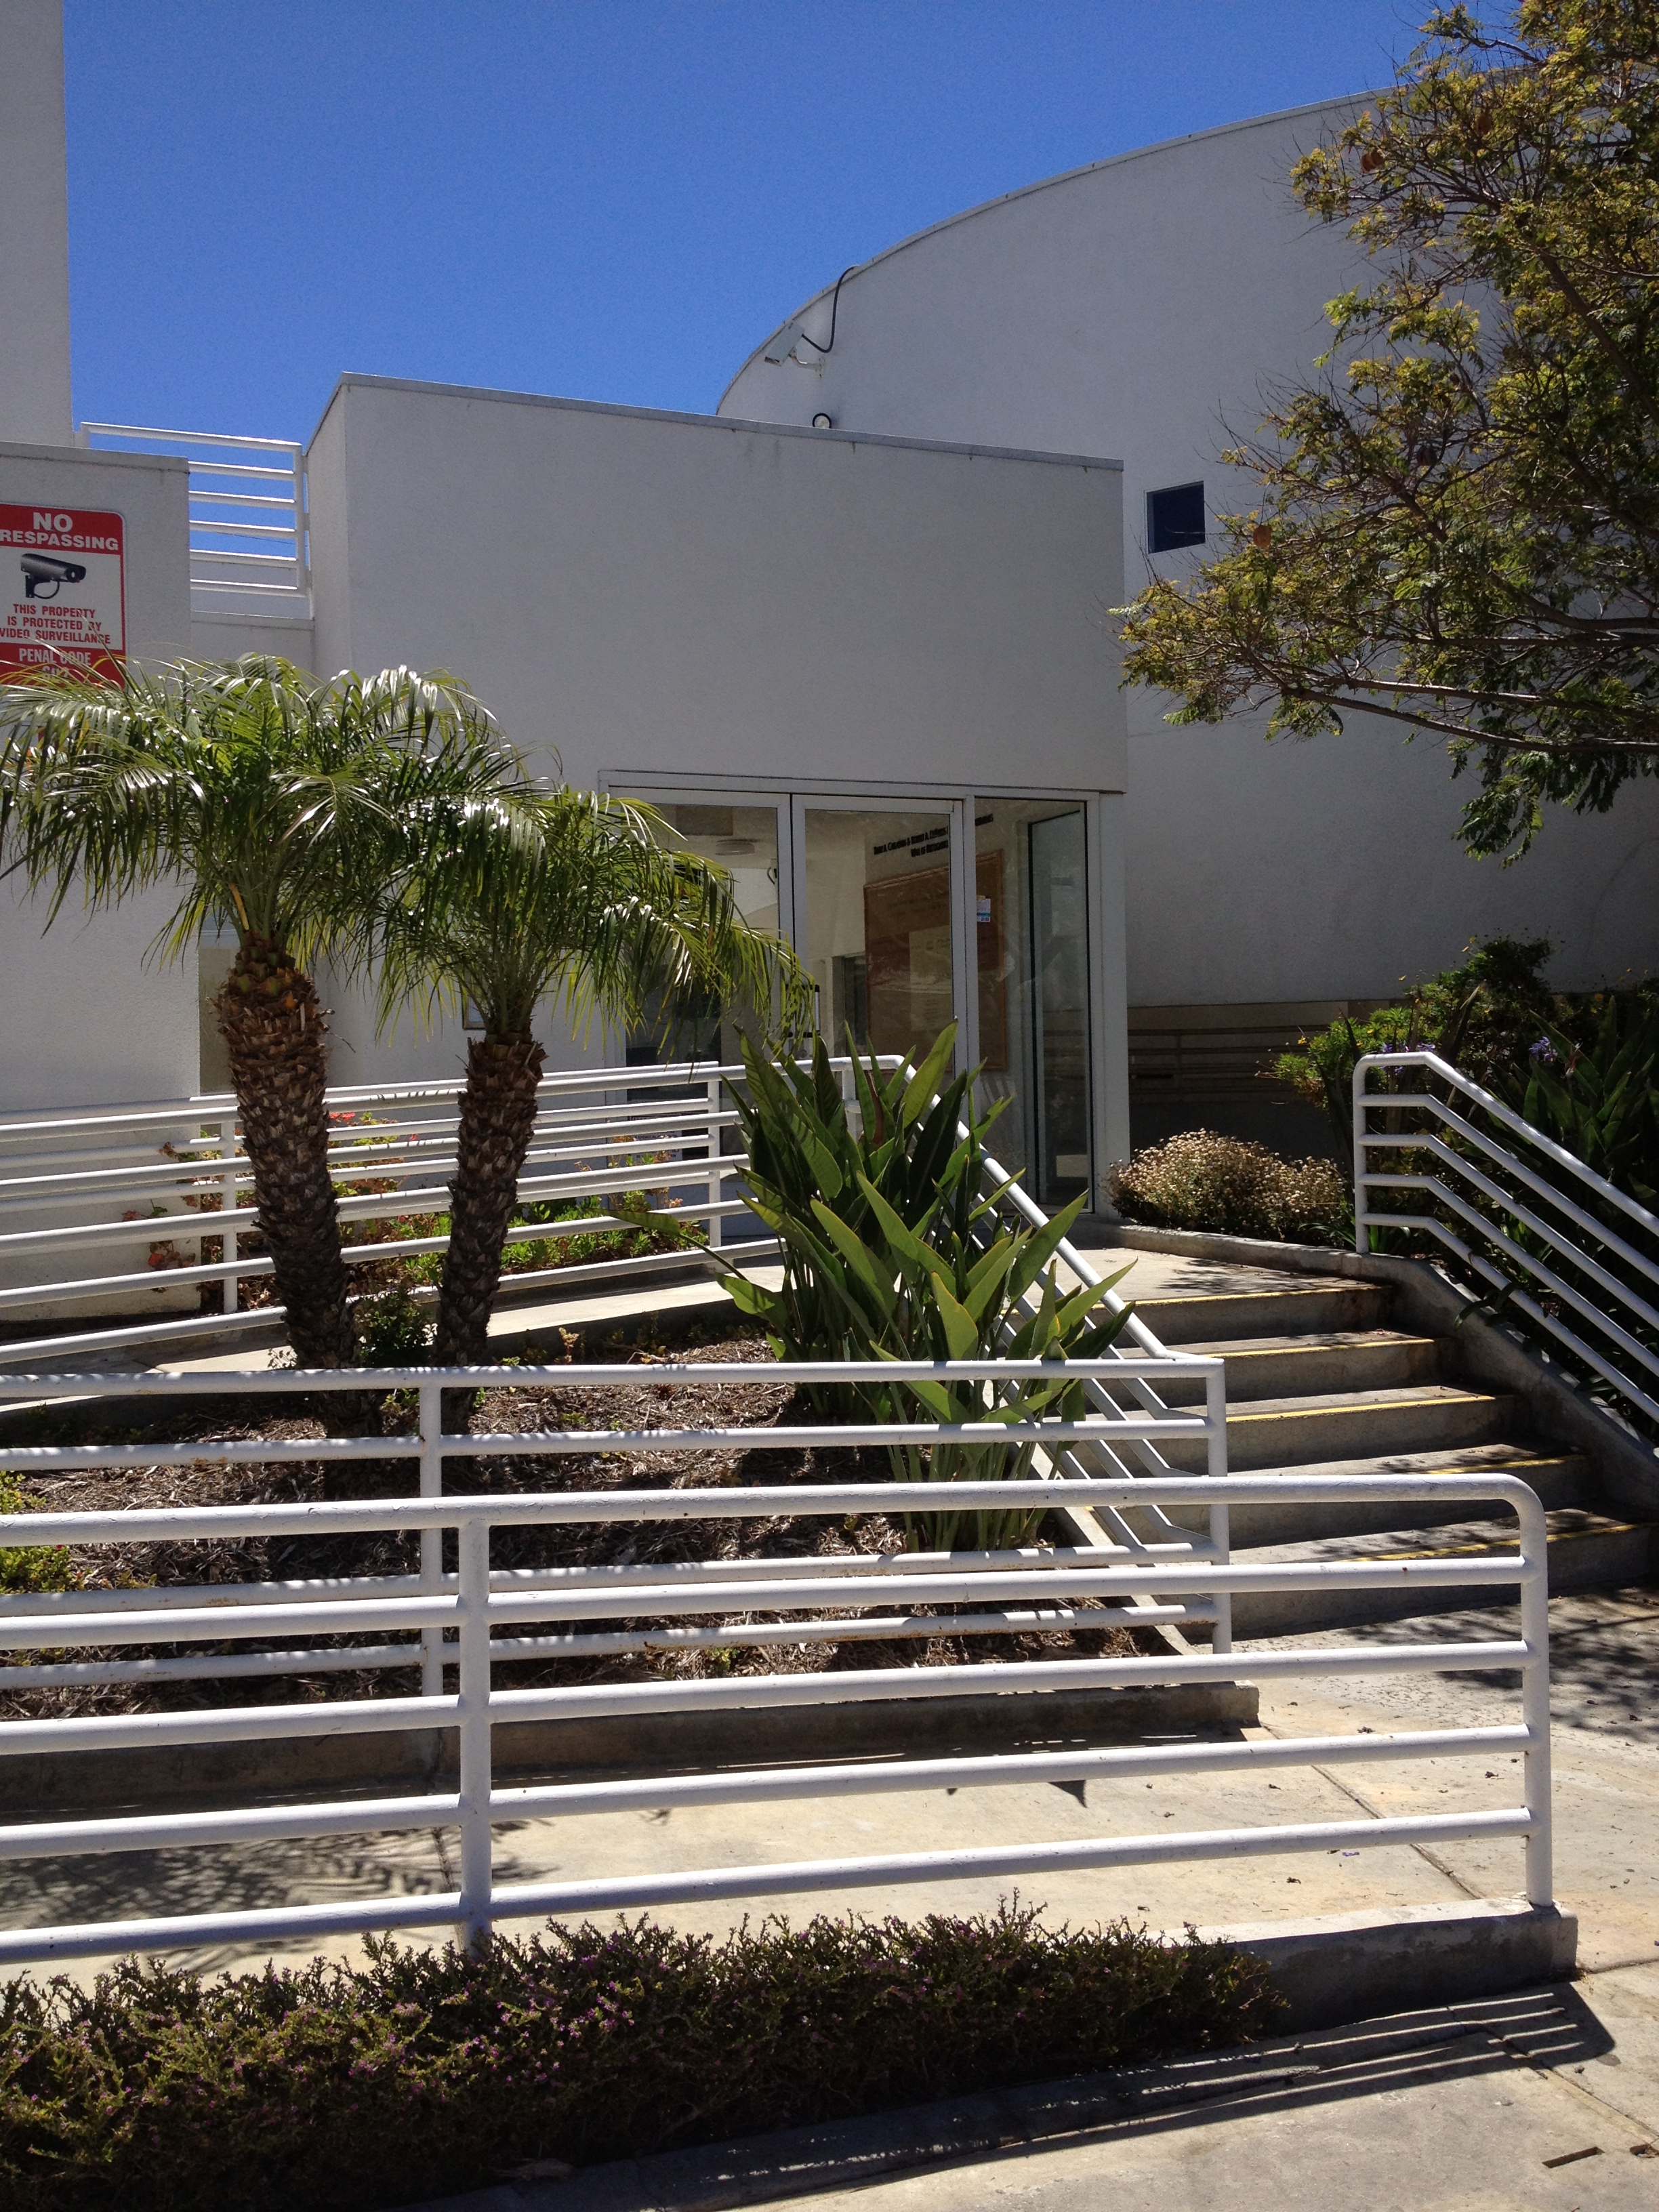 View of ramp toward the building entrance, concrete steps, white handrails around both ramp and steps, little palm trees and other plants in the middle, no trespassing sign on the wall on the left side, glass doors entrance.